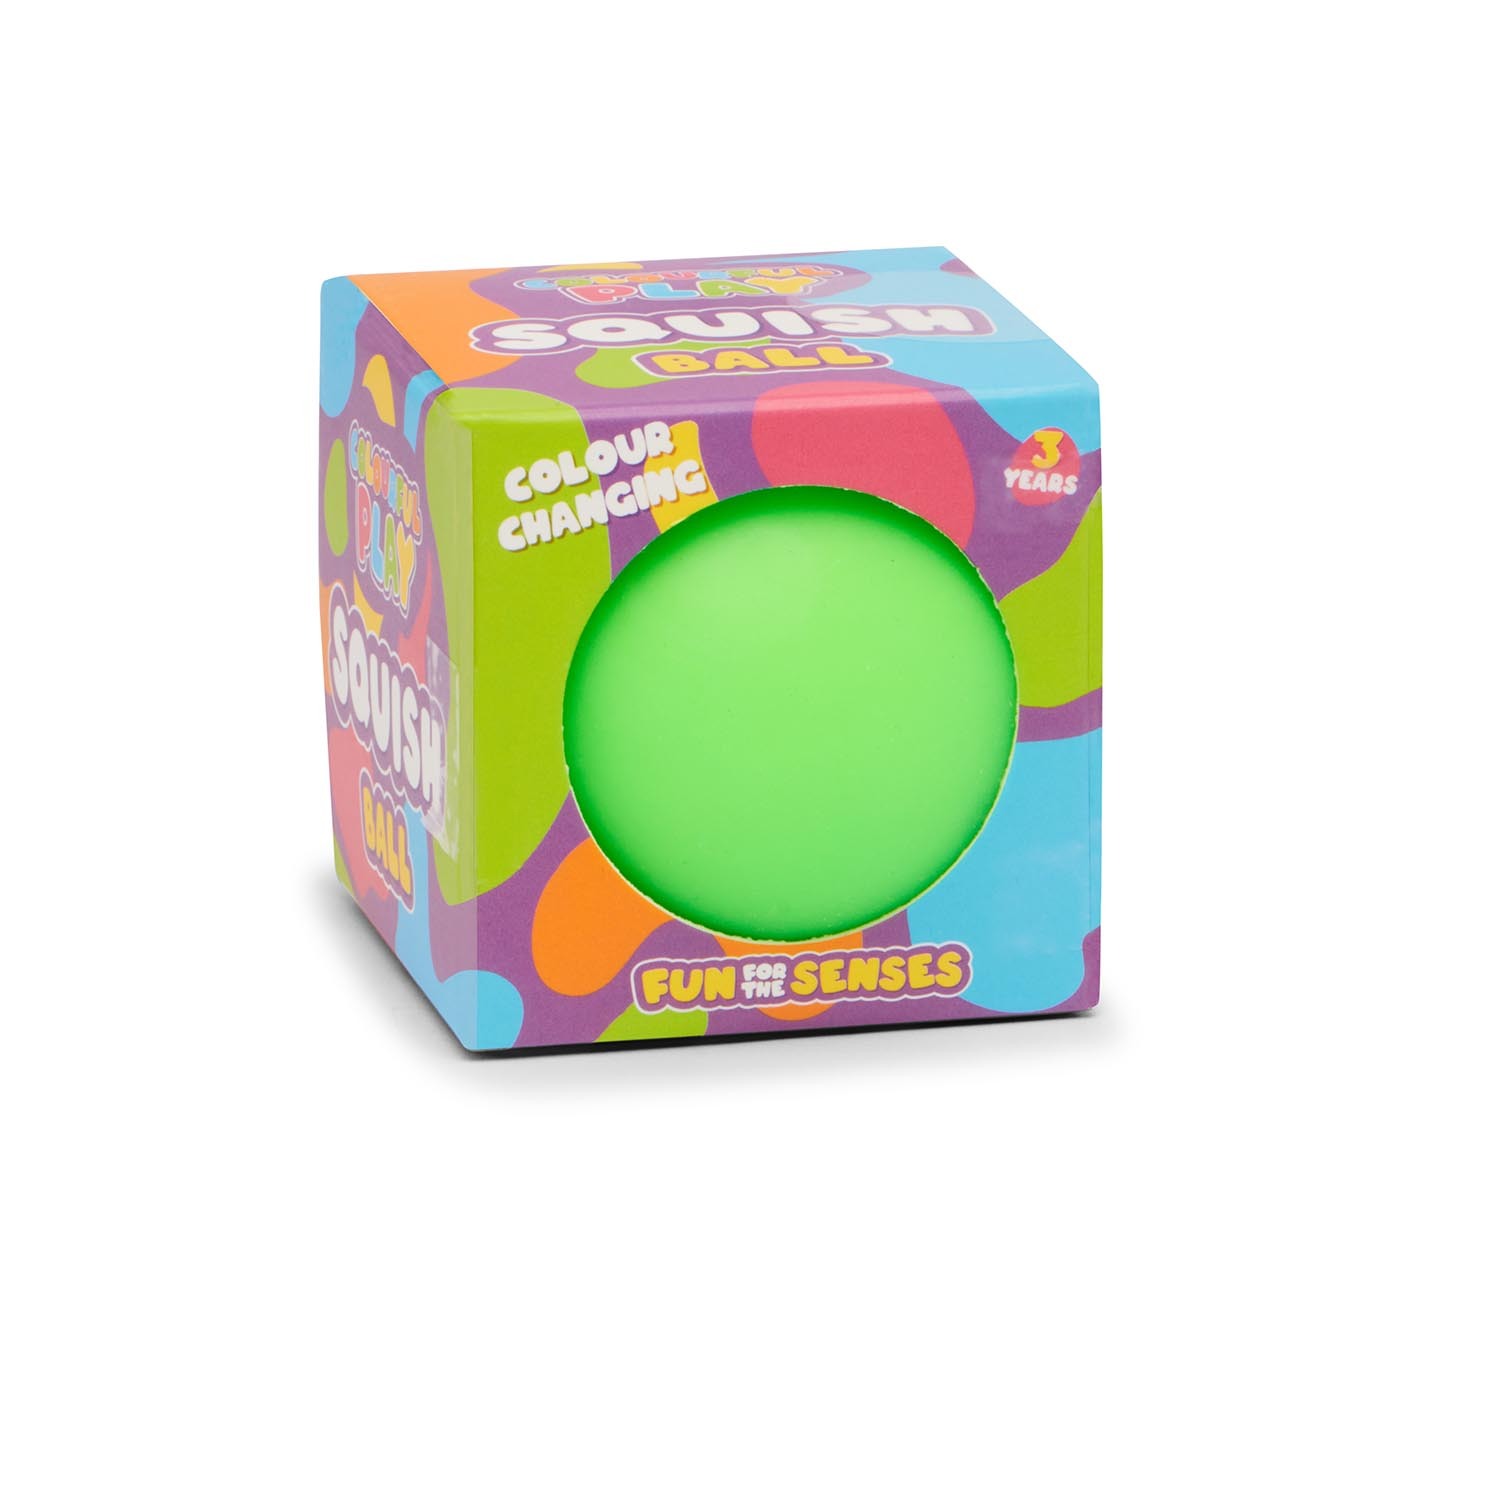 Single ToyMania Colour Changing Sensory Squish Ball in Assorted styles Image 3